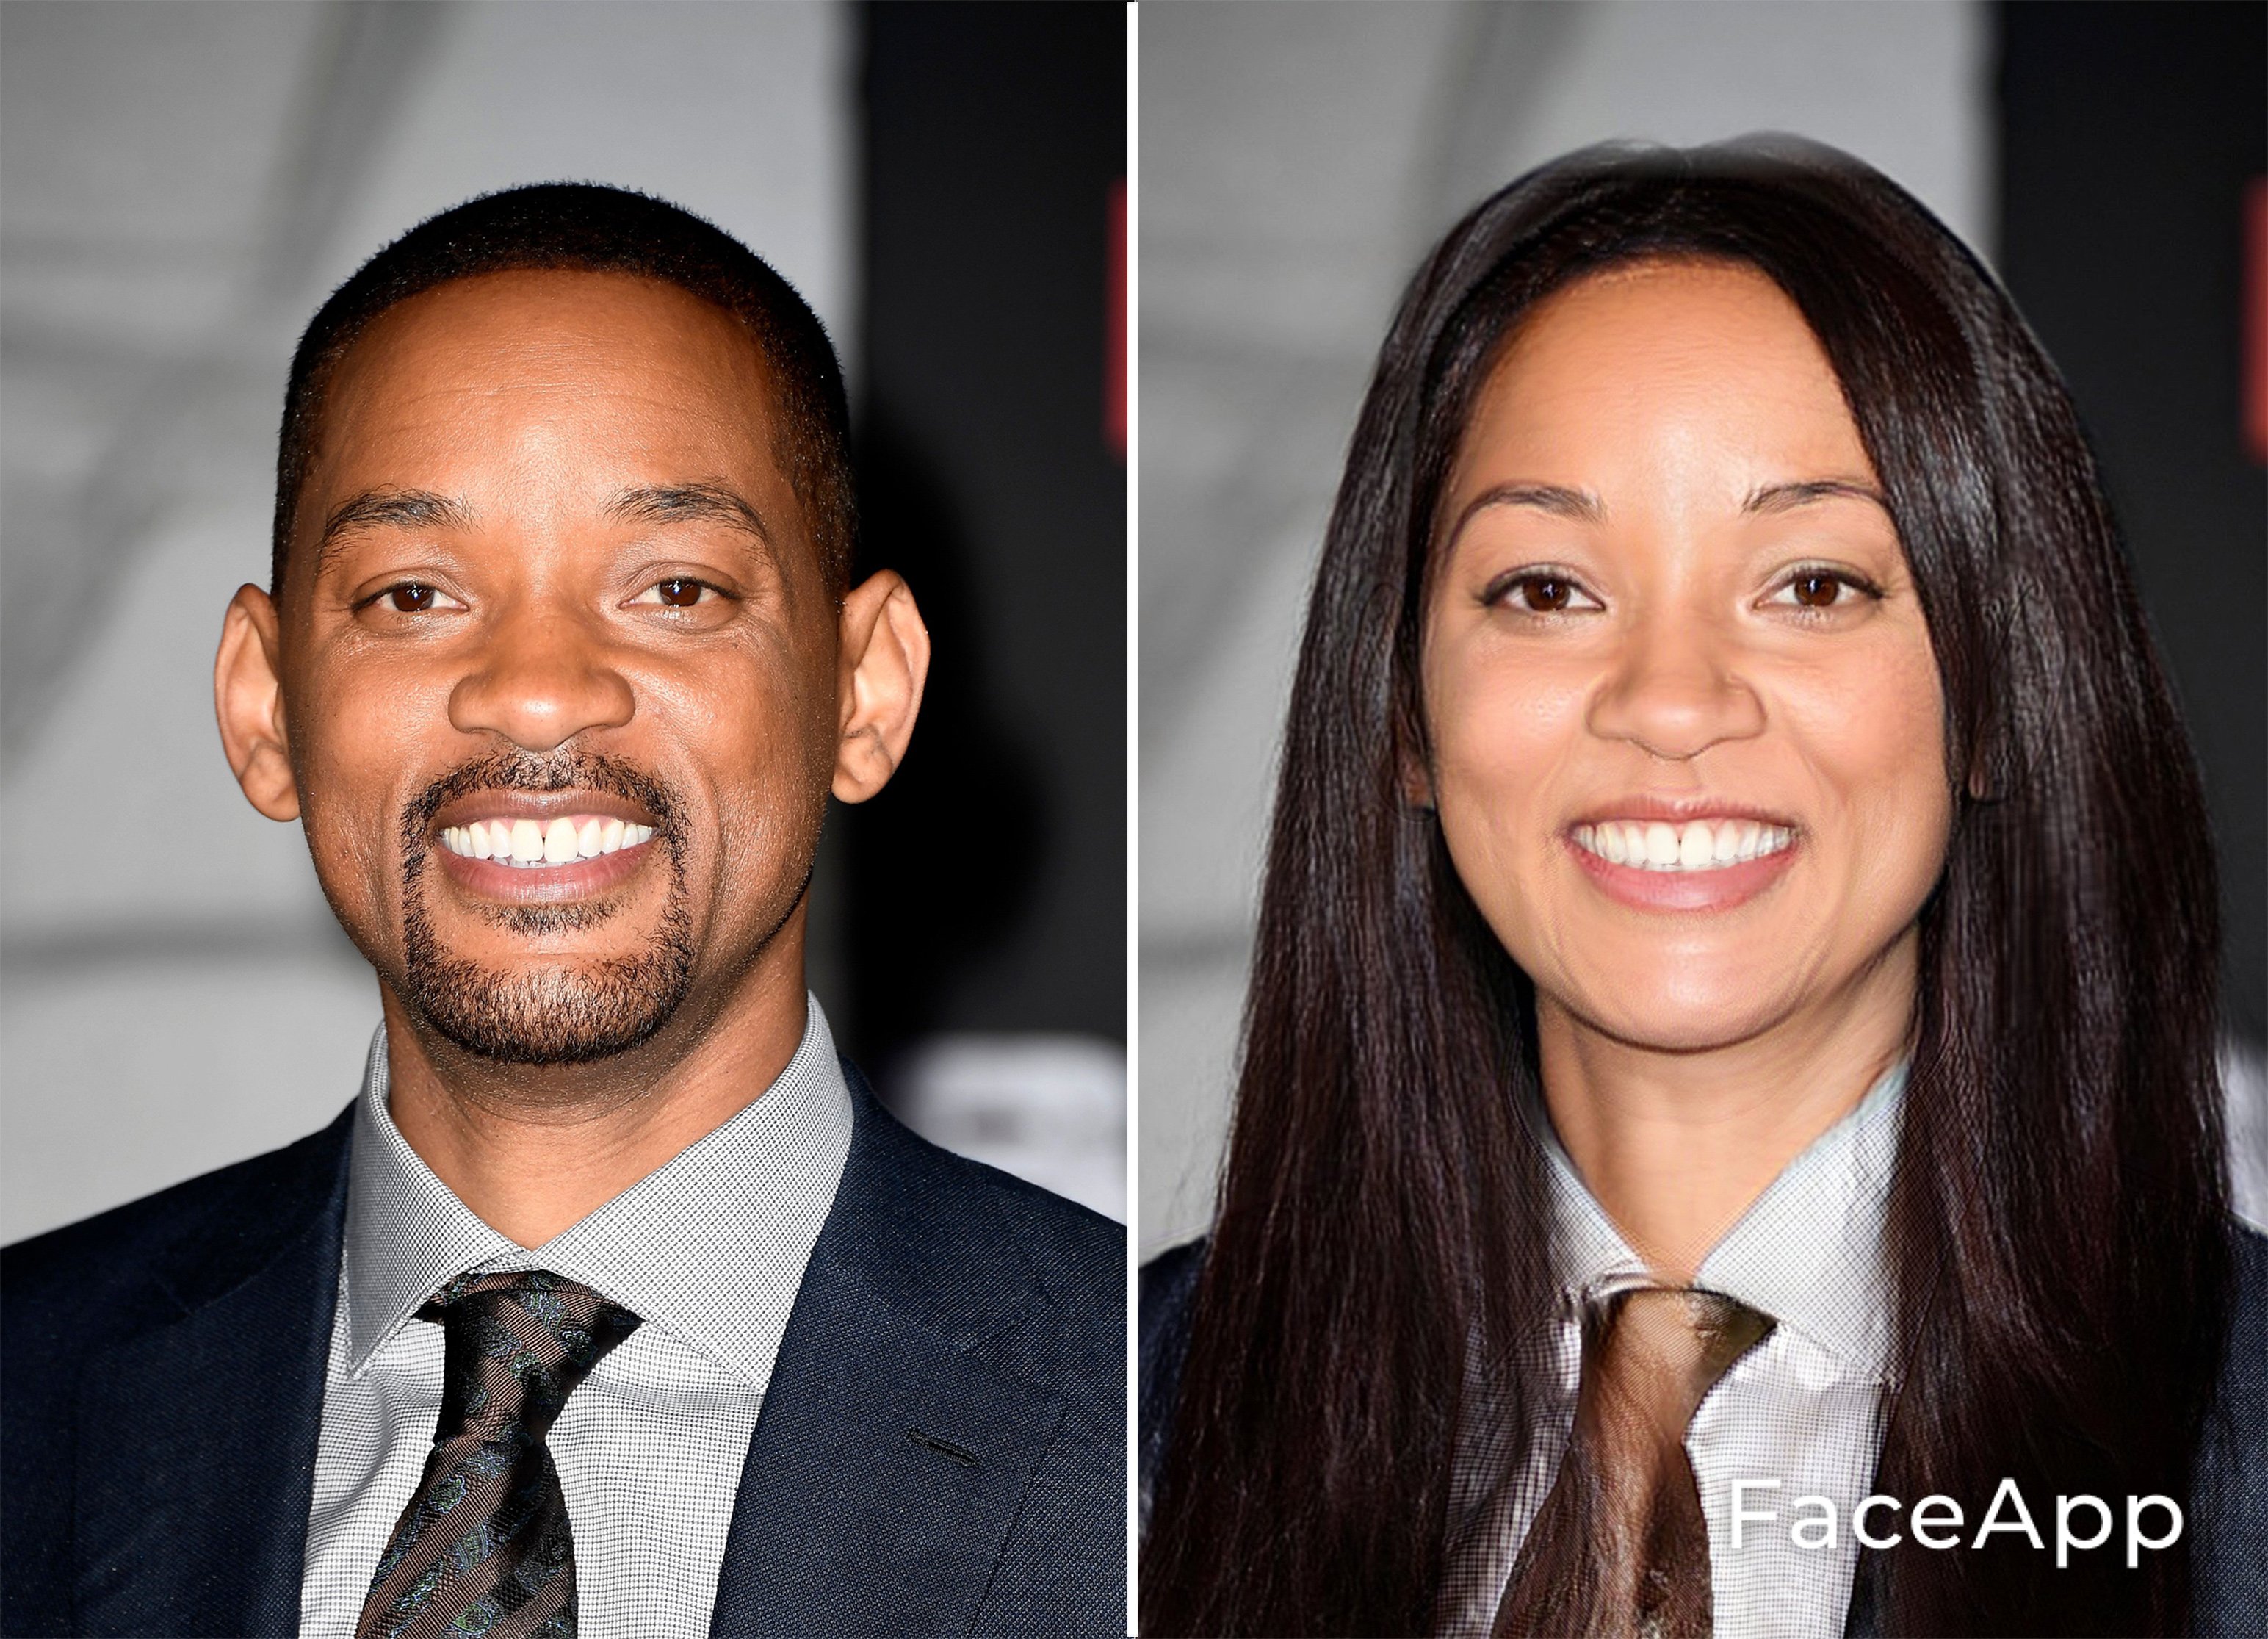 Will Smith| Source: Getty Images/Face App